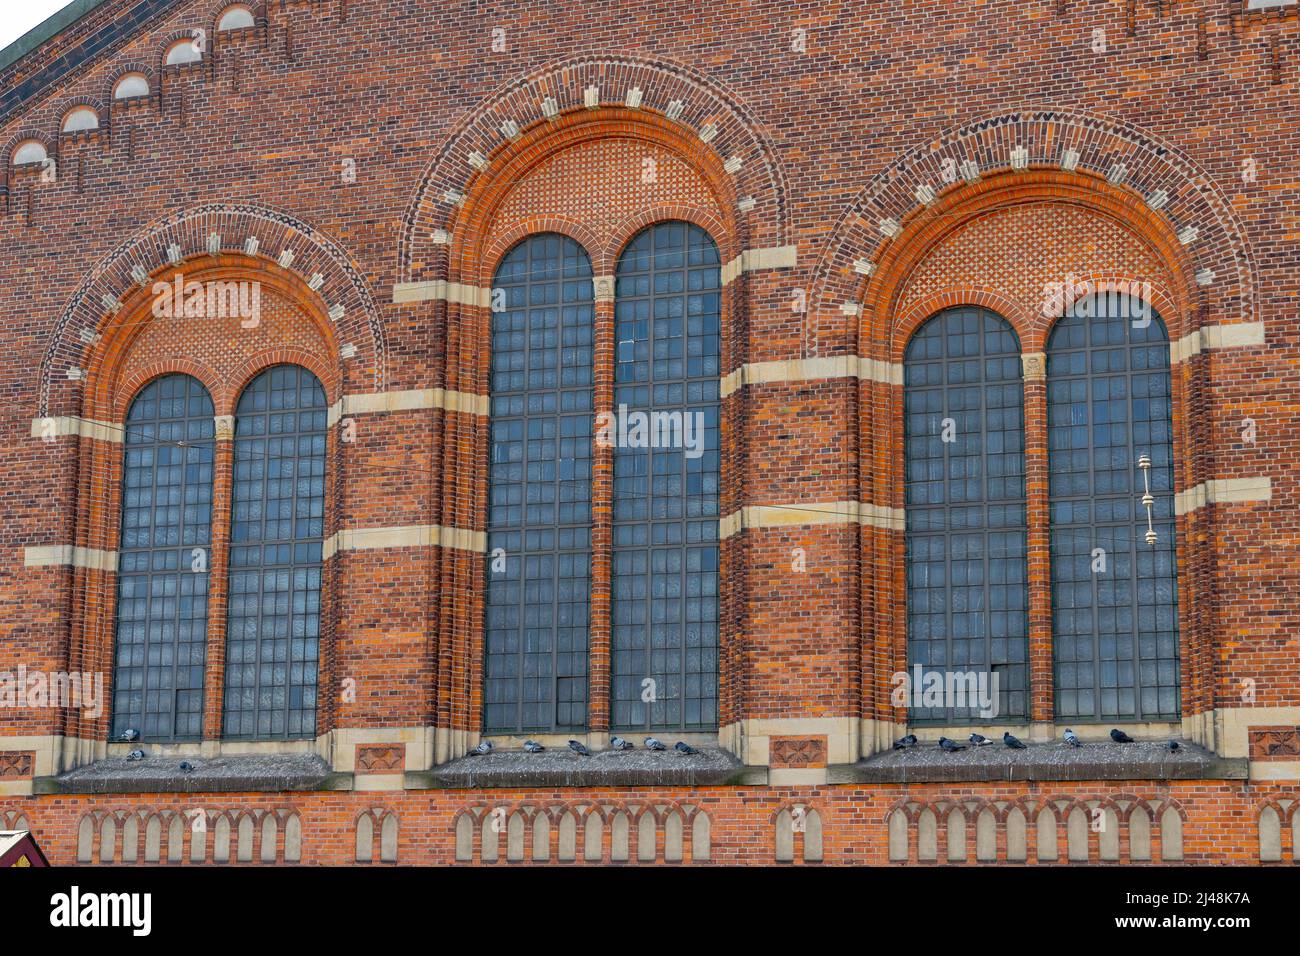 Detail of the windows in the facade of Copenhagen Central Station. The main train station in Copenhagen. Copenhagen, Denmark, Europe Stock Photo